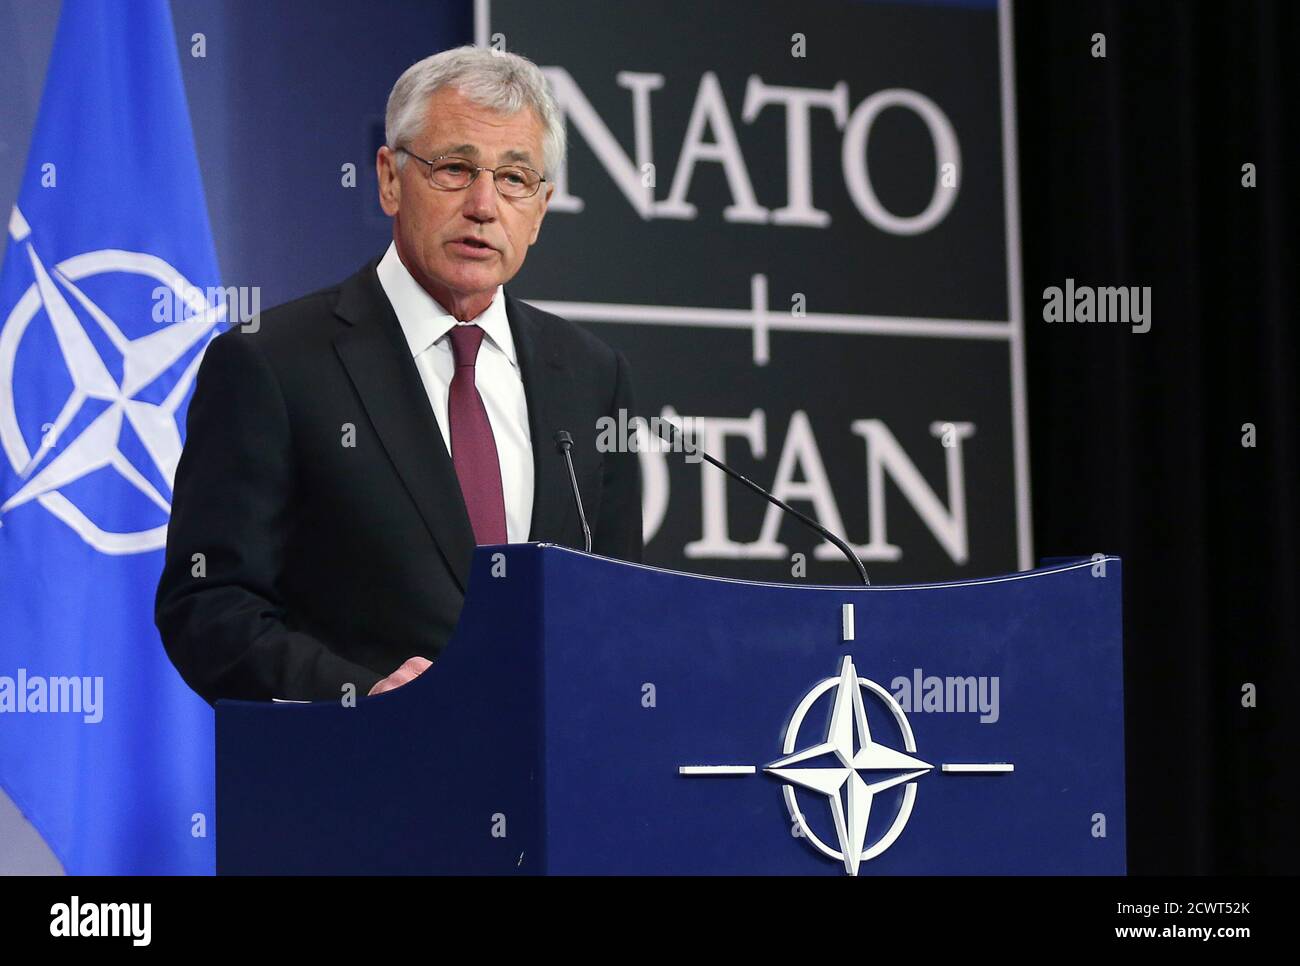 U.S. Secretary of Defense Chuck Hagel addresses a news conference during a NATO defence ministers meeting at the Alliance headquarters in Brussels February 27, 2014. Russia must be transparent about military exercises along Ukraine's border and not take any steps that could be misinterpreted or "lead to miscalculation during a delicate time," Hagel said on Thursday. REUTERS/Francois Lenoir (BELGIUM - Tags: POLITICS MILITARY) Stock Photo